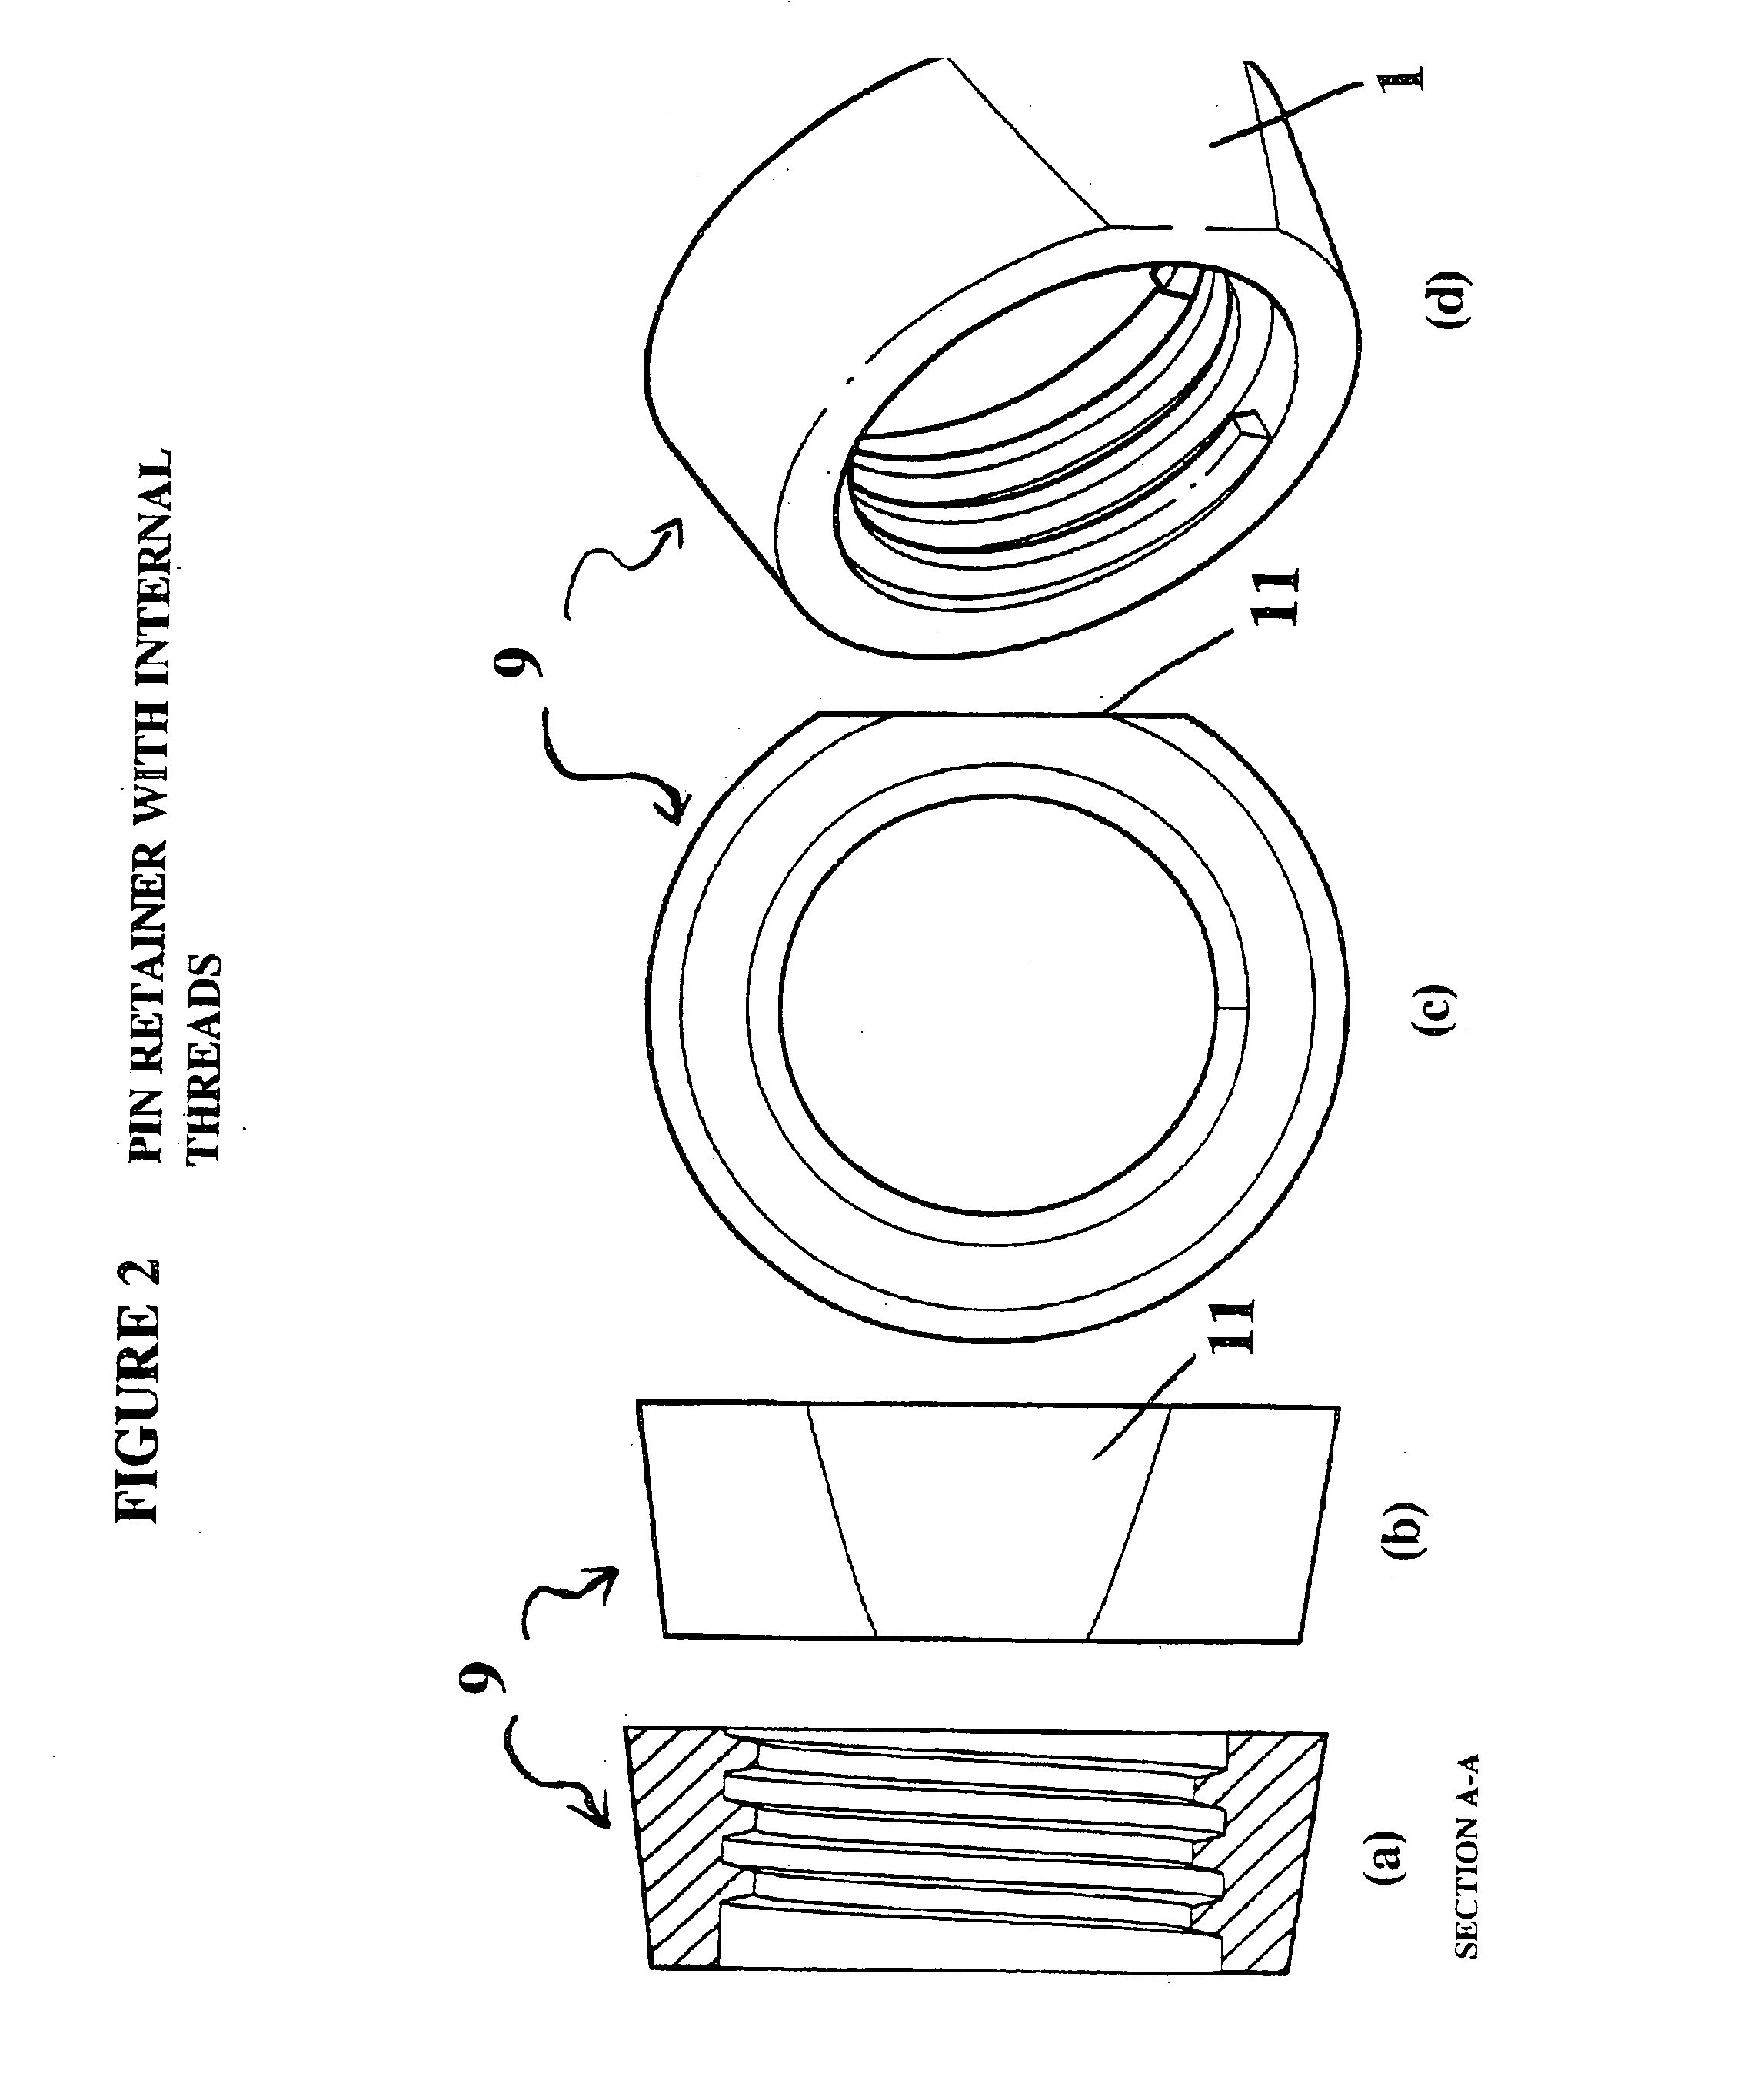 Torque locking system for fastening a wear member to a support structure